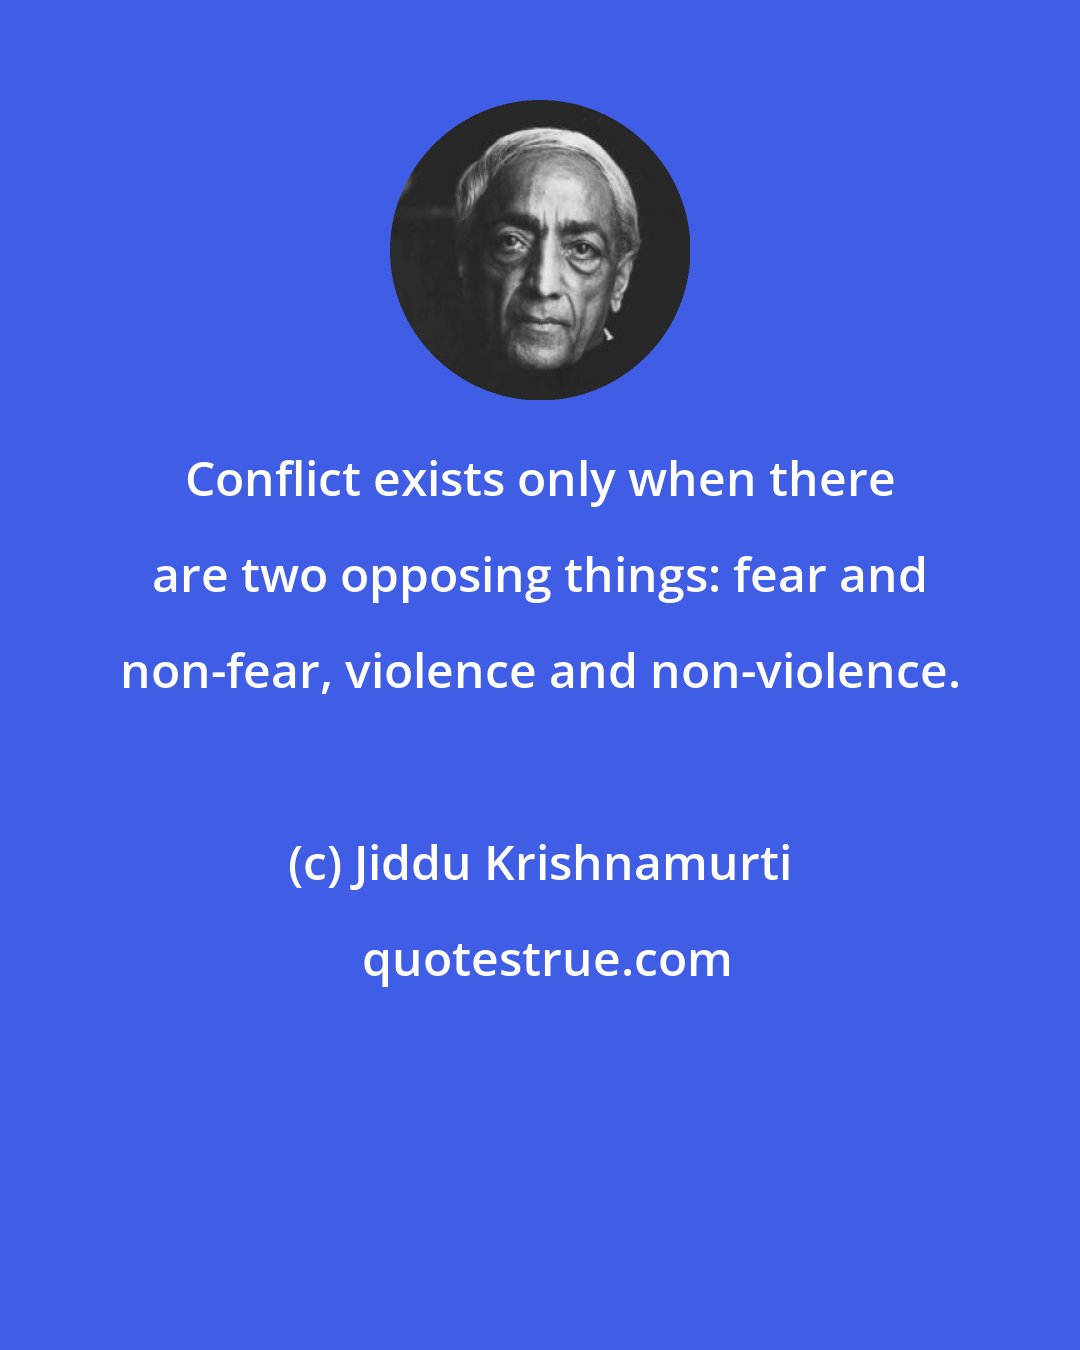 Jiddu Krishnamurti: Conflict exists only when there are two opposing things: fear and non-fear, violence and non-violence.